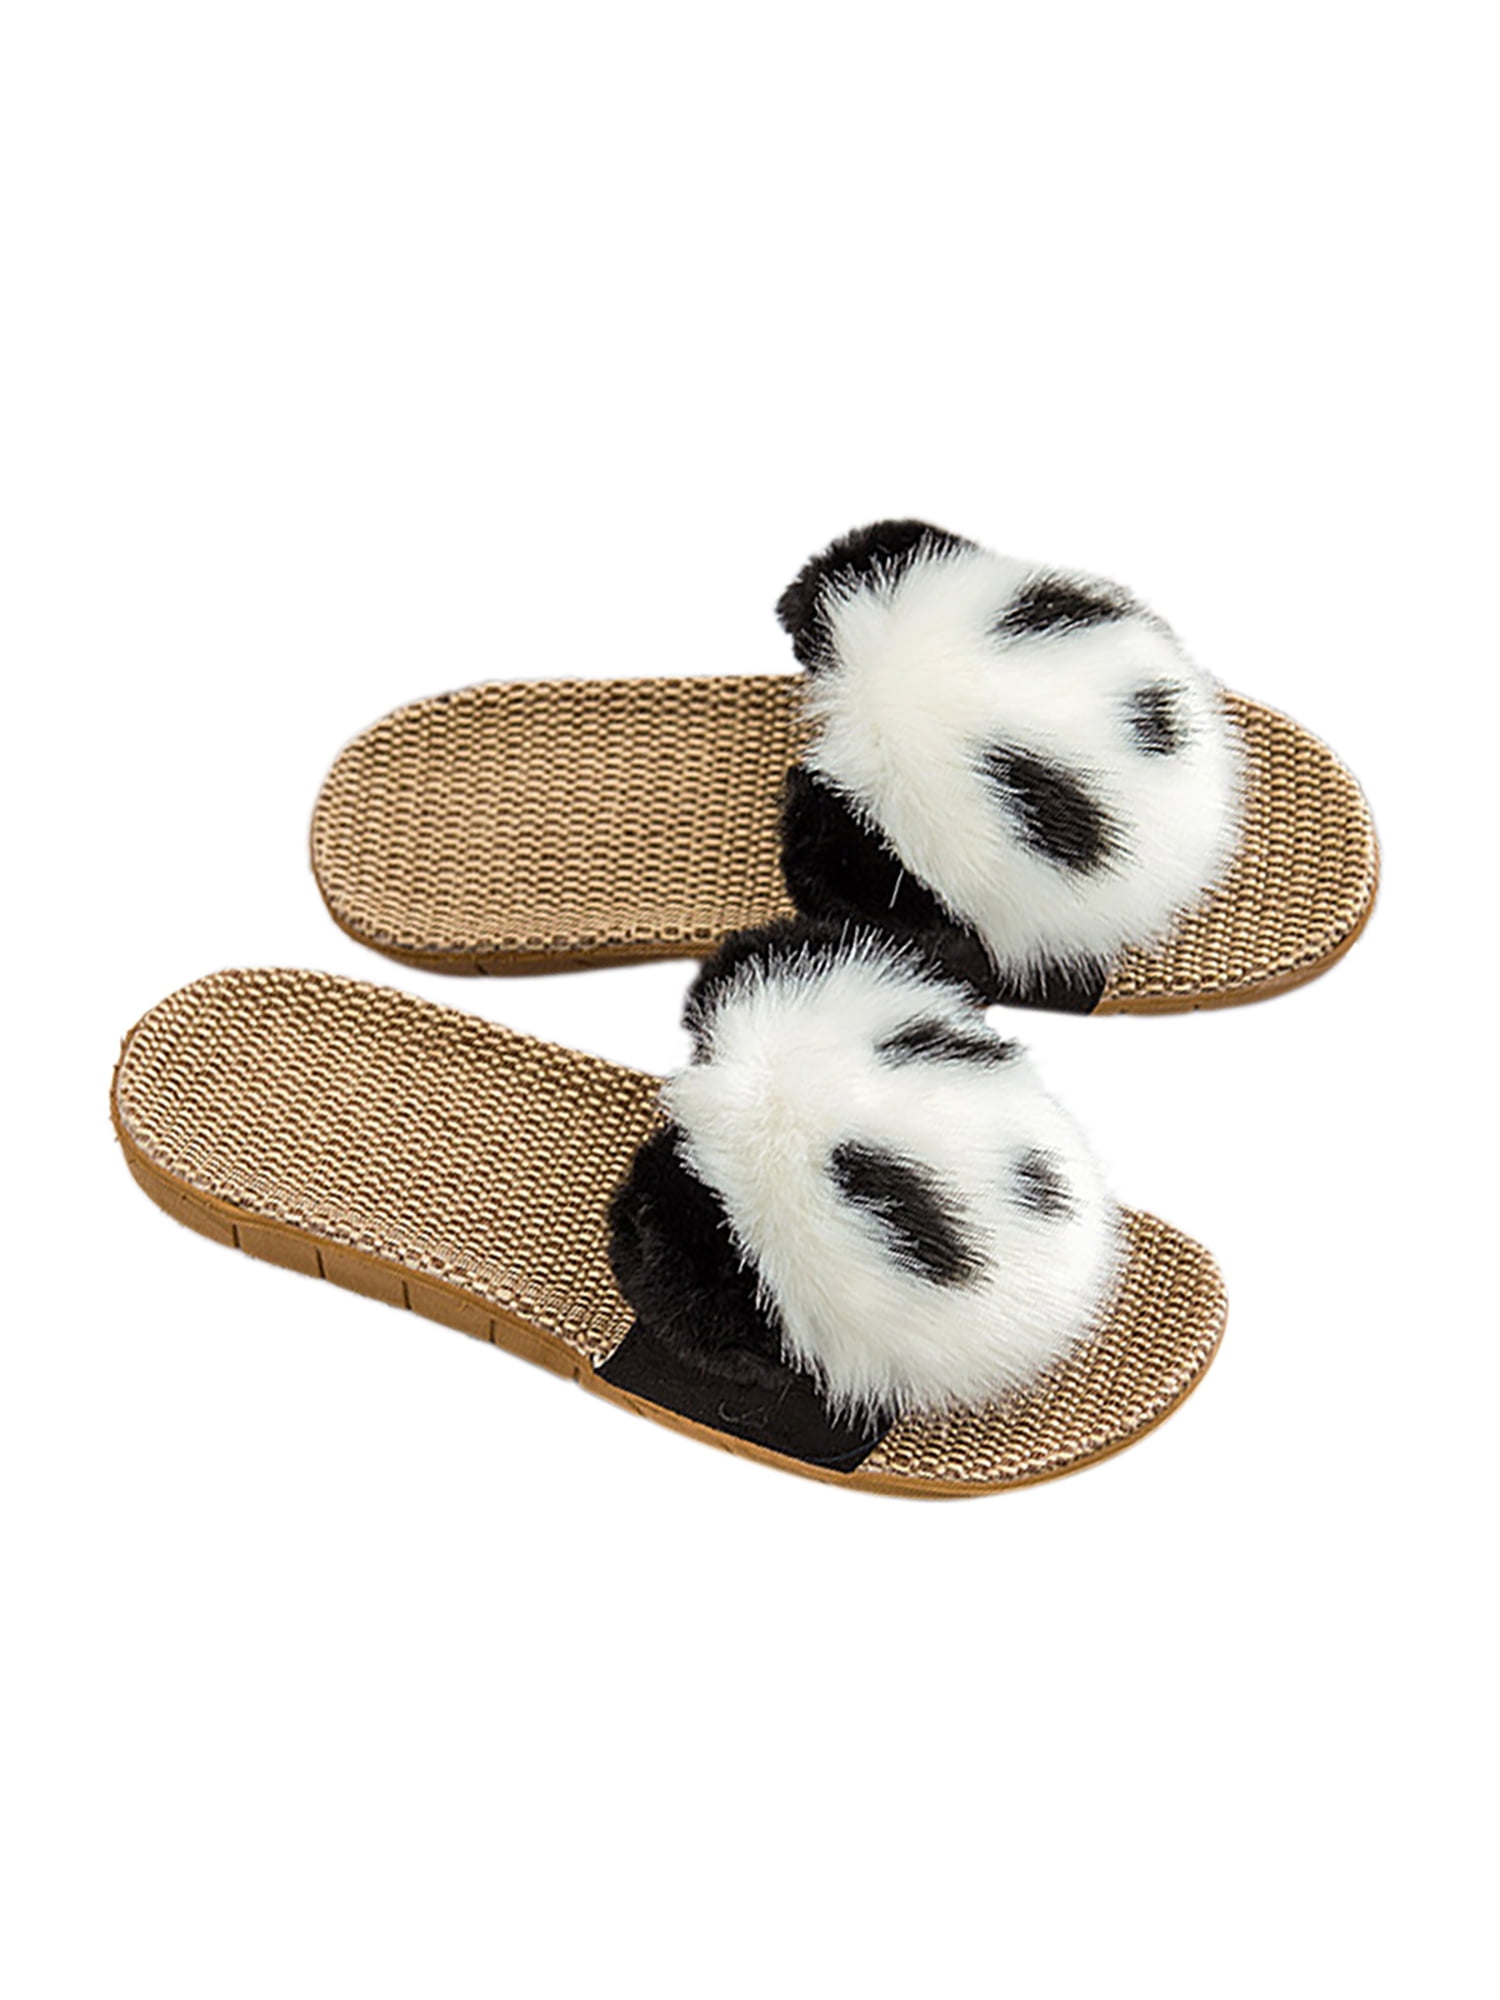 Pandaie Womens .. Sandals Womens Shoes Lady Flats Sandals Leather Ankle Casual Slipper Soft Shoes 